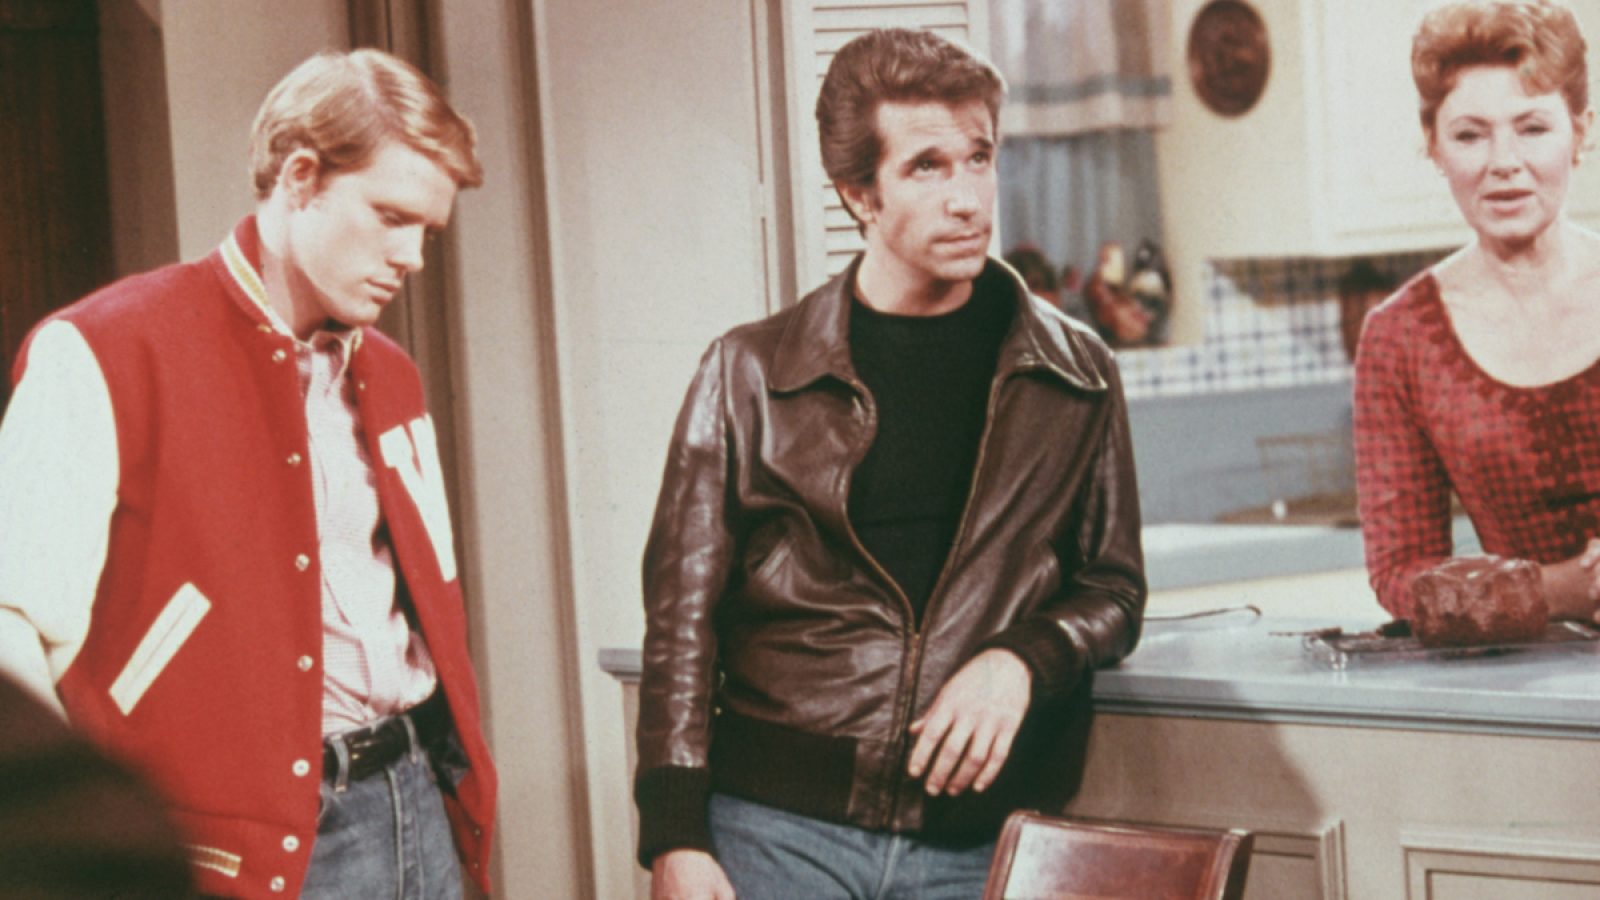 The “Insult” That Made Ron Howard Threaten to Quit “Happy Days